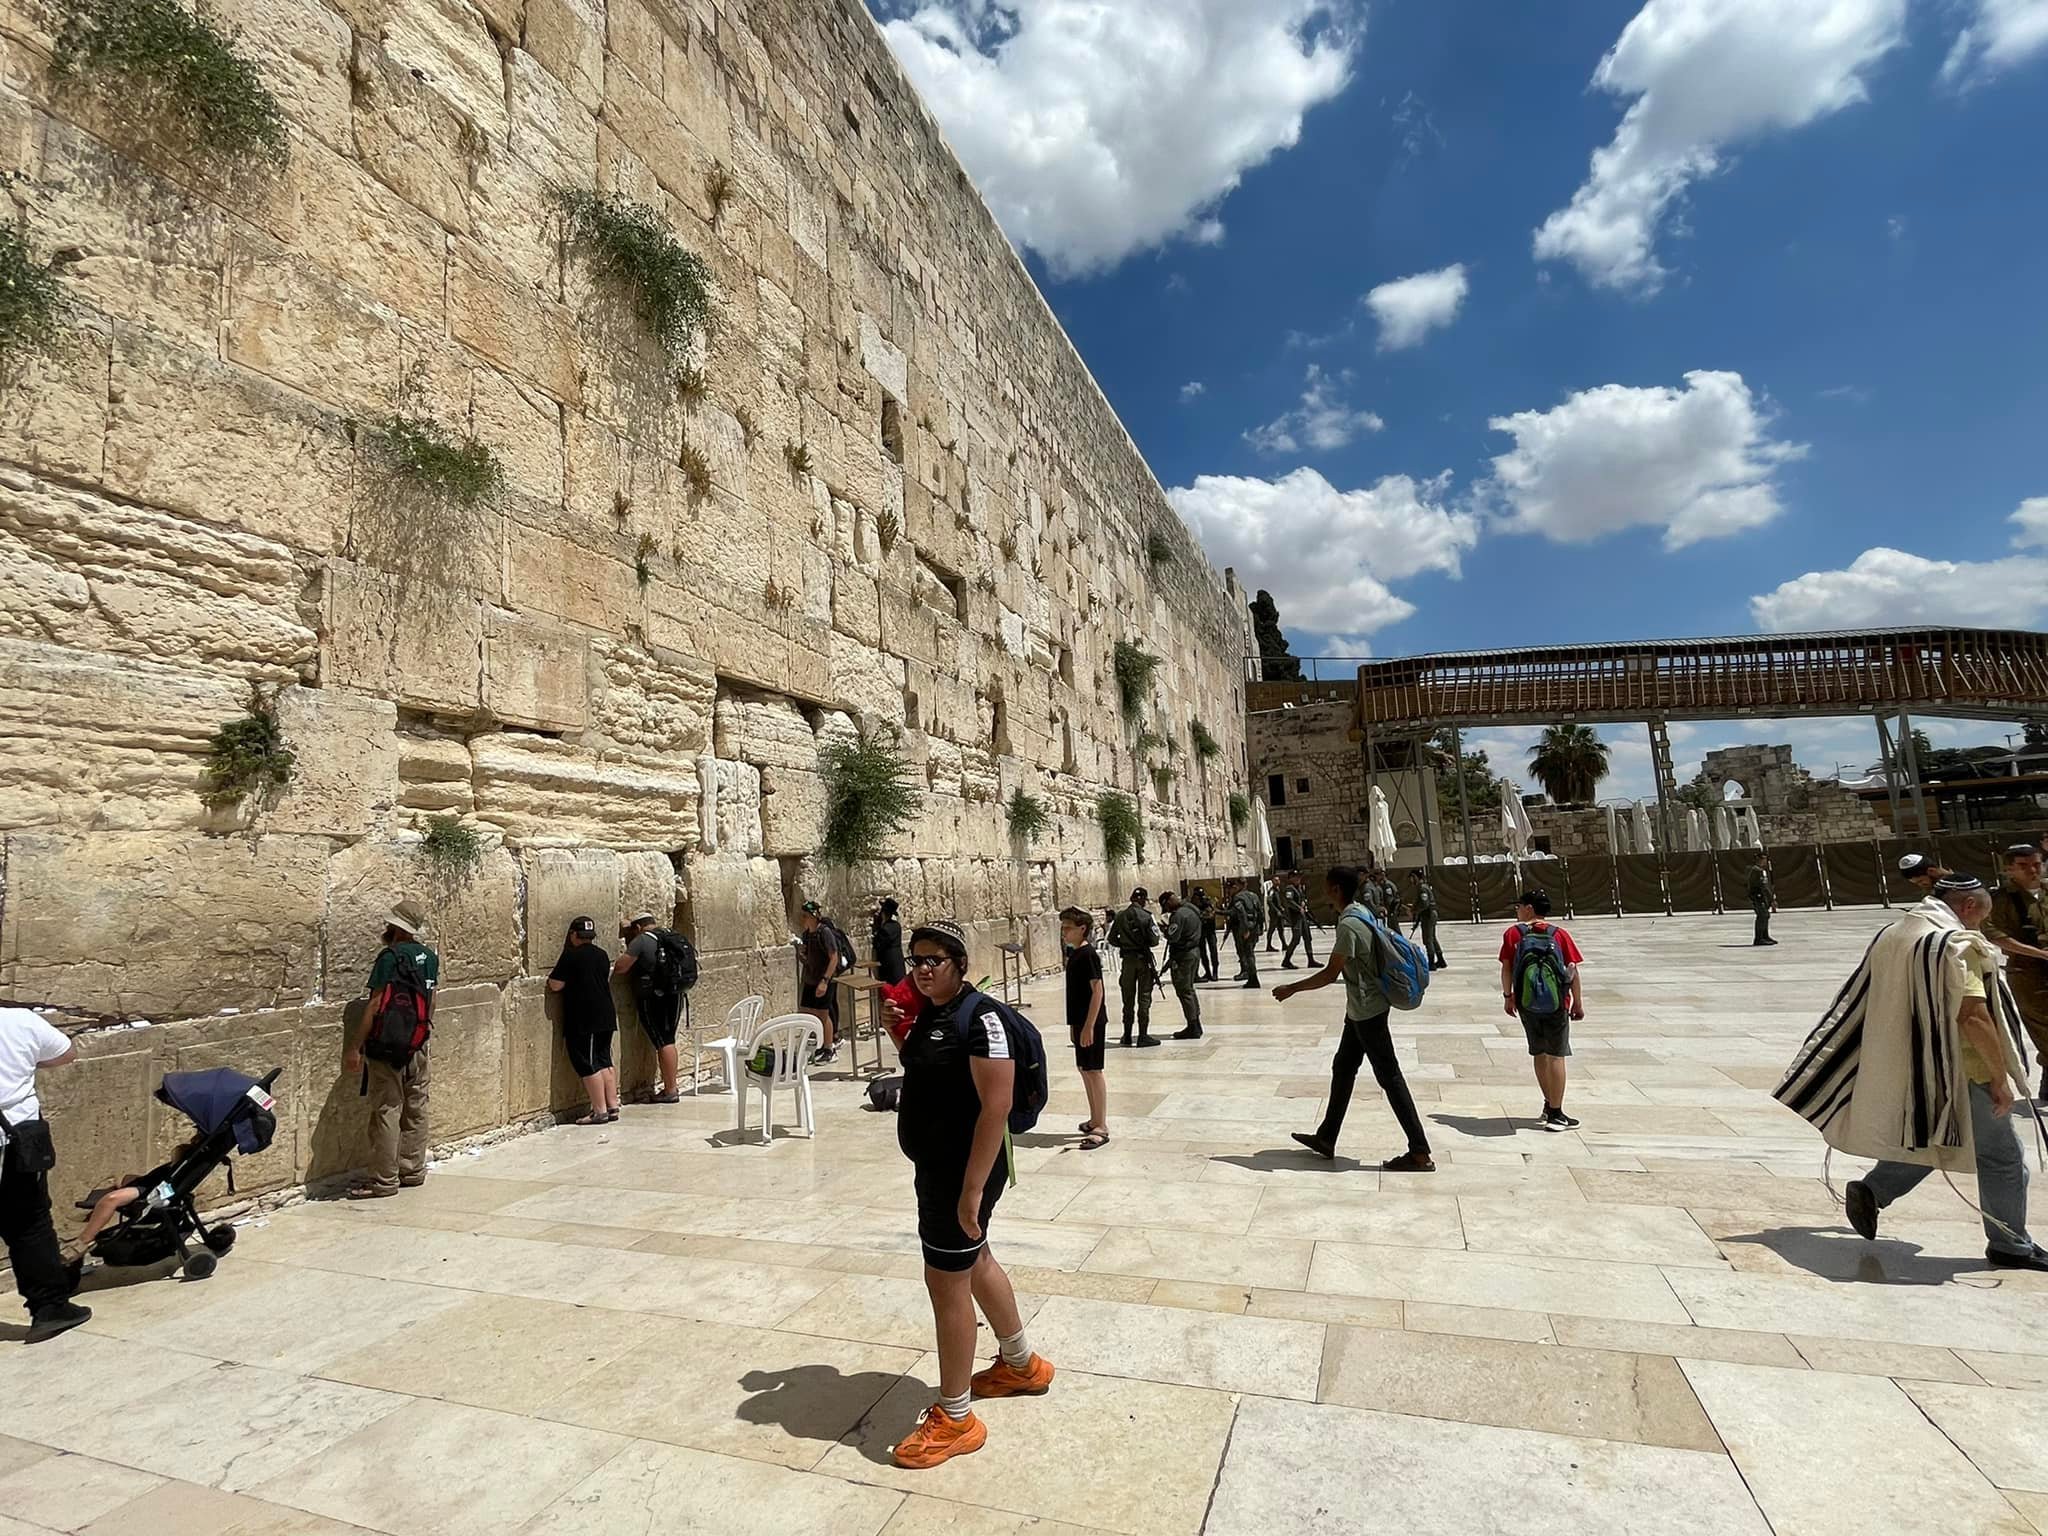  The Wailing Wall. It is called that because the Jews come there to pray for the restoration of the temple. The stones are part of the retaining wall for the foundation of the Temple Mount. The first seven layers are from Herod the Great’s time. The 